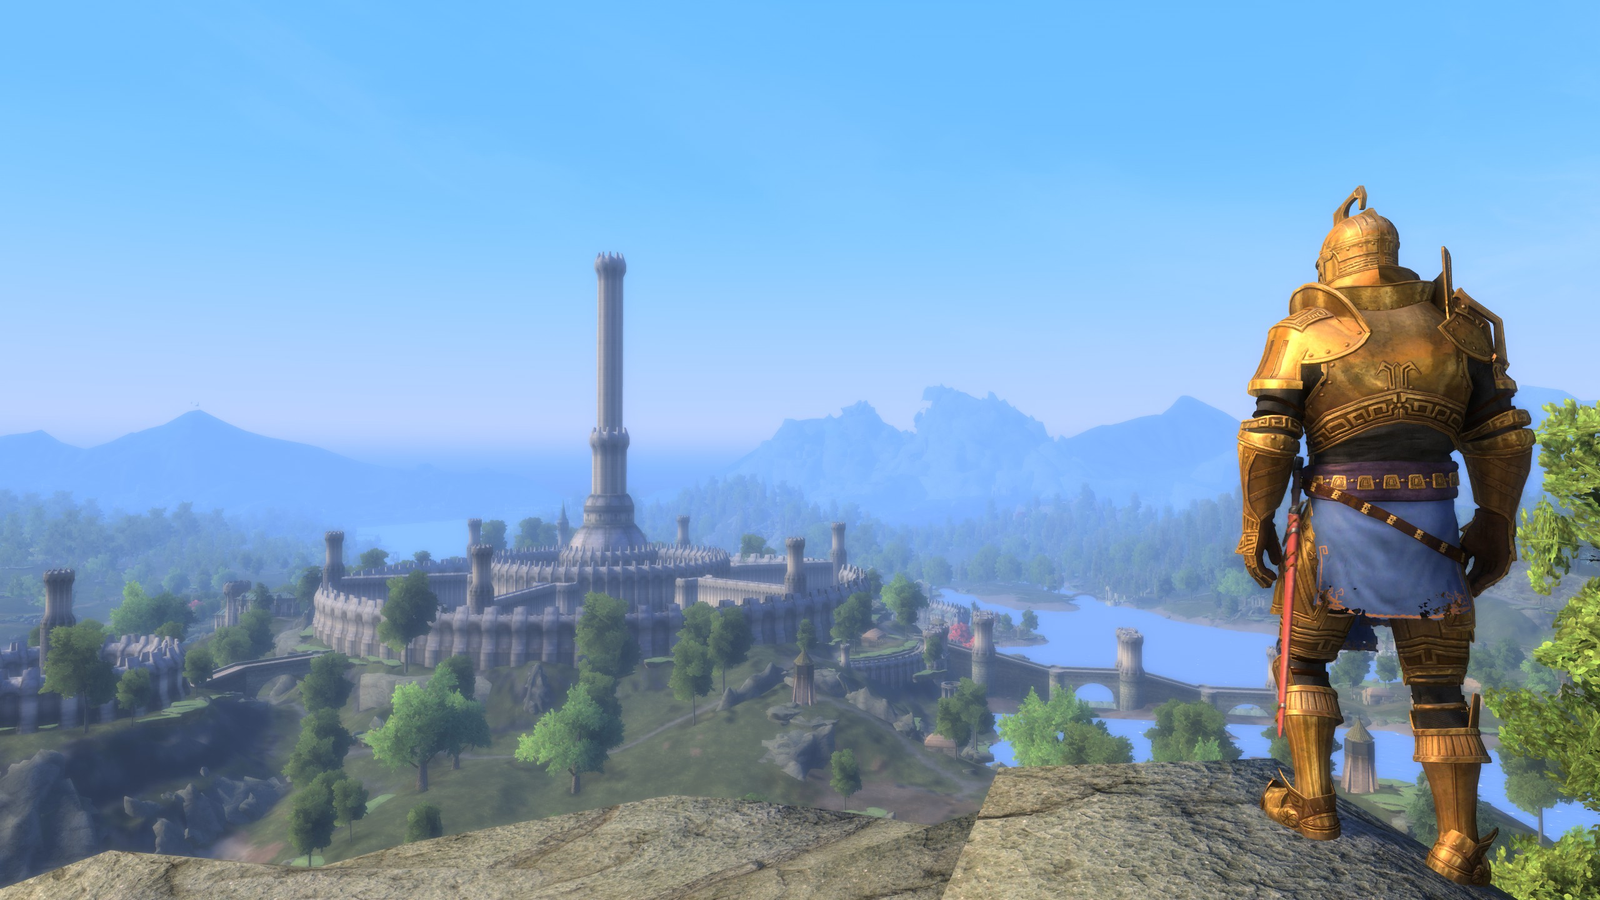 Waiting for news on the Elder Scrolls 6? This spooky new Skyblivion  showcase could scratch your itch